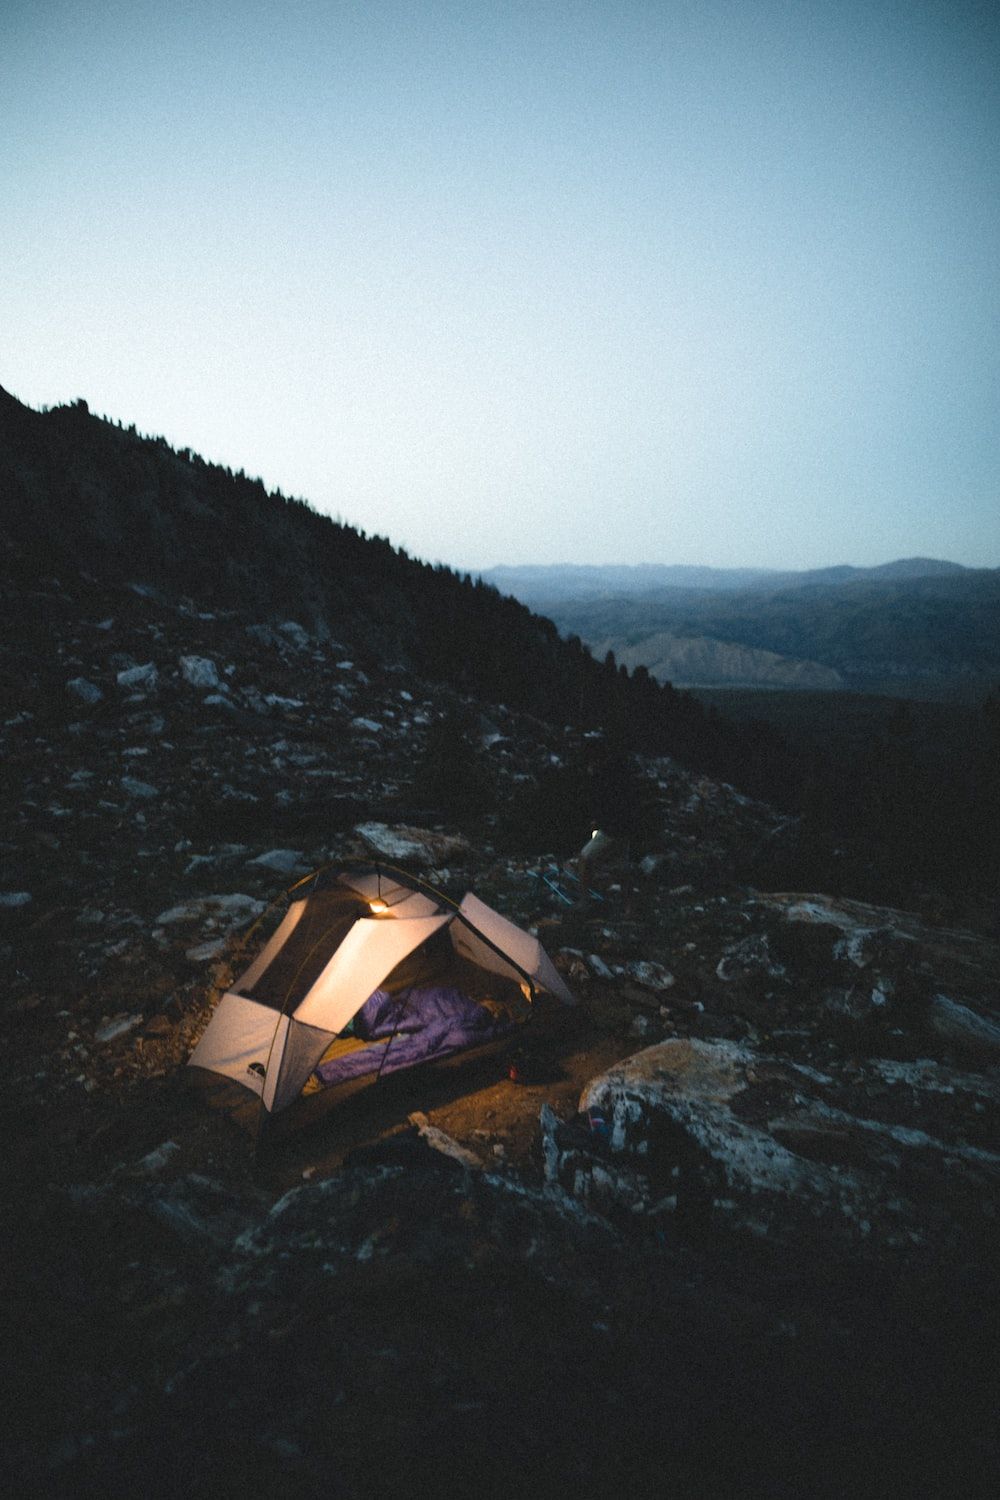 A tent pitched on a rocky hillside at dusk. - Camping